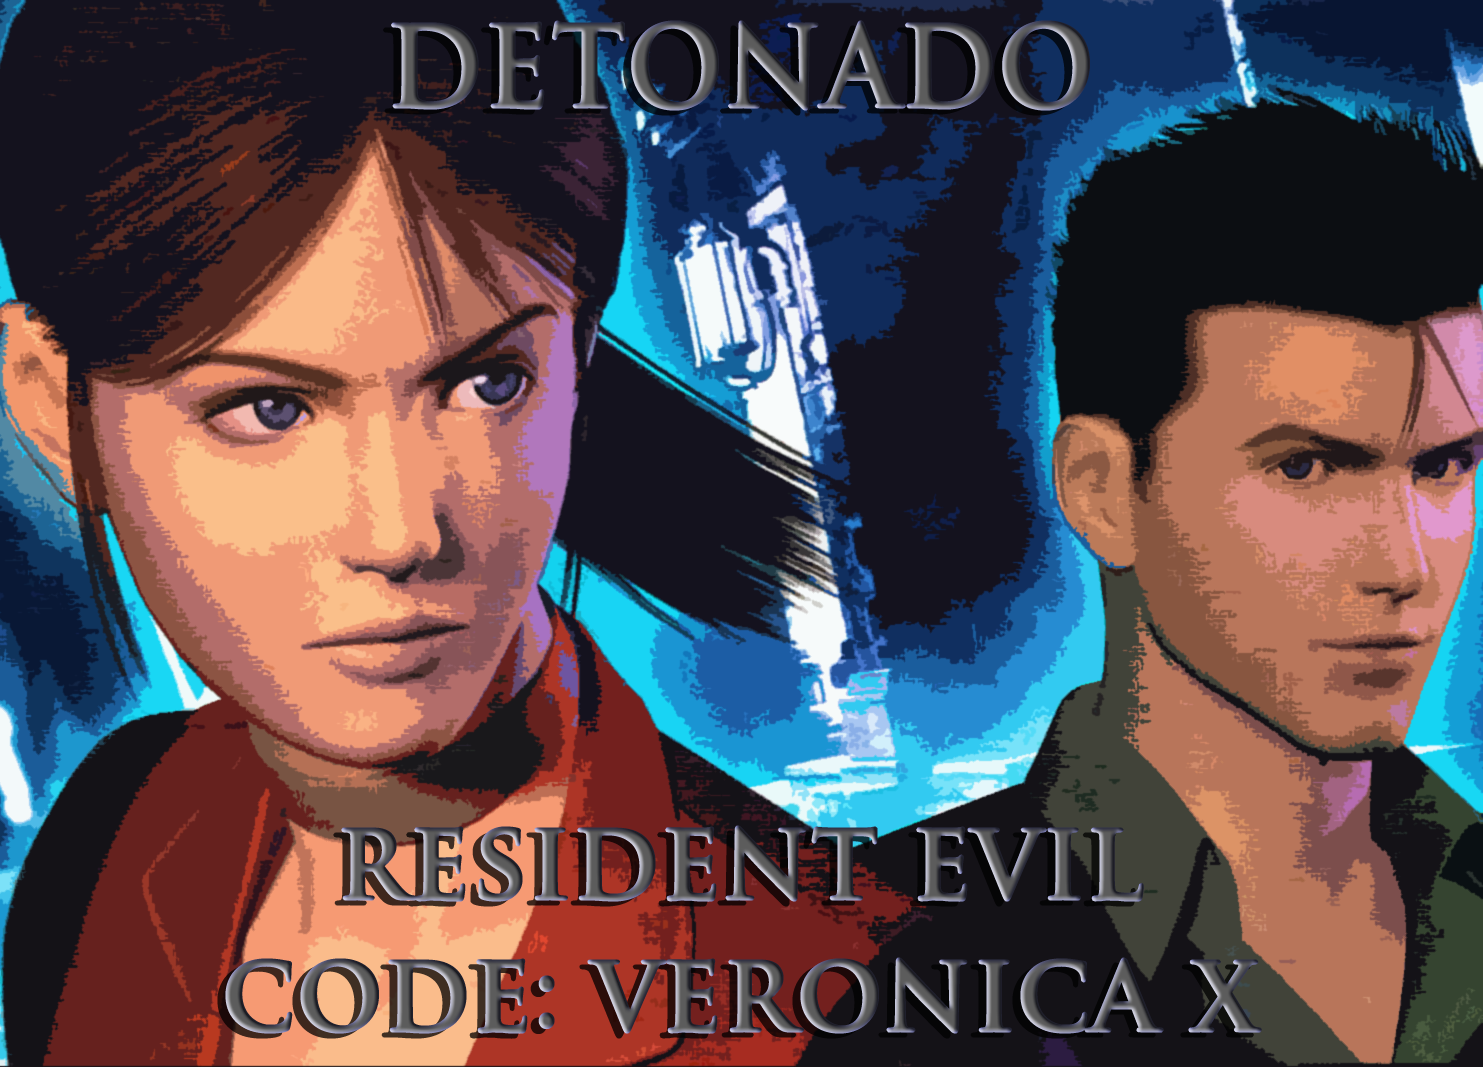 Paper Weight (Resident Evil Code: Veronica)